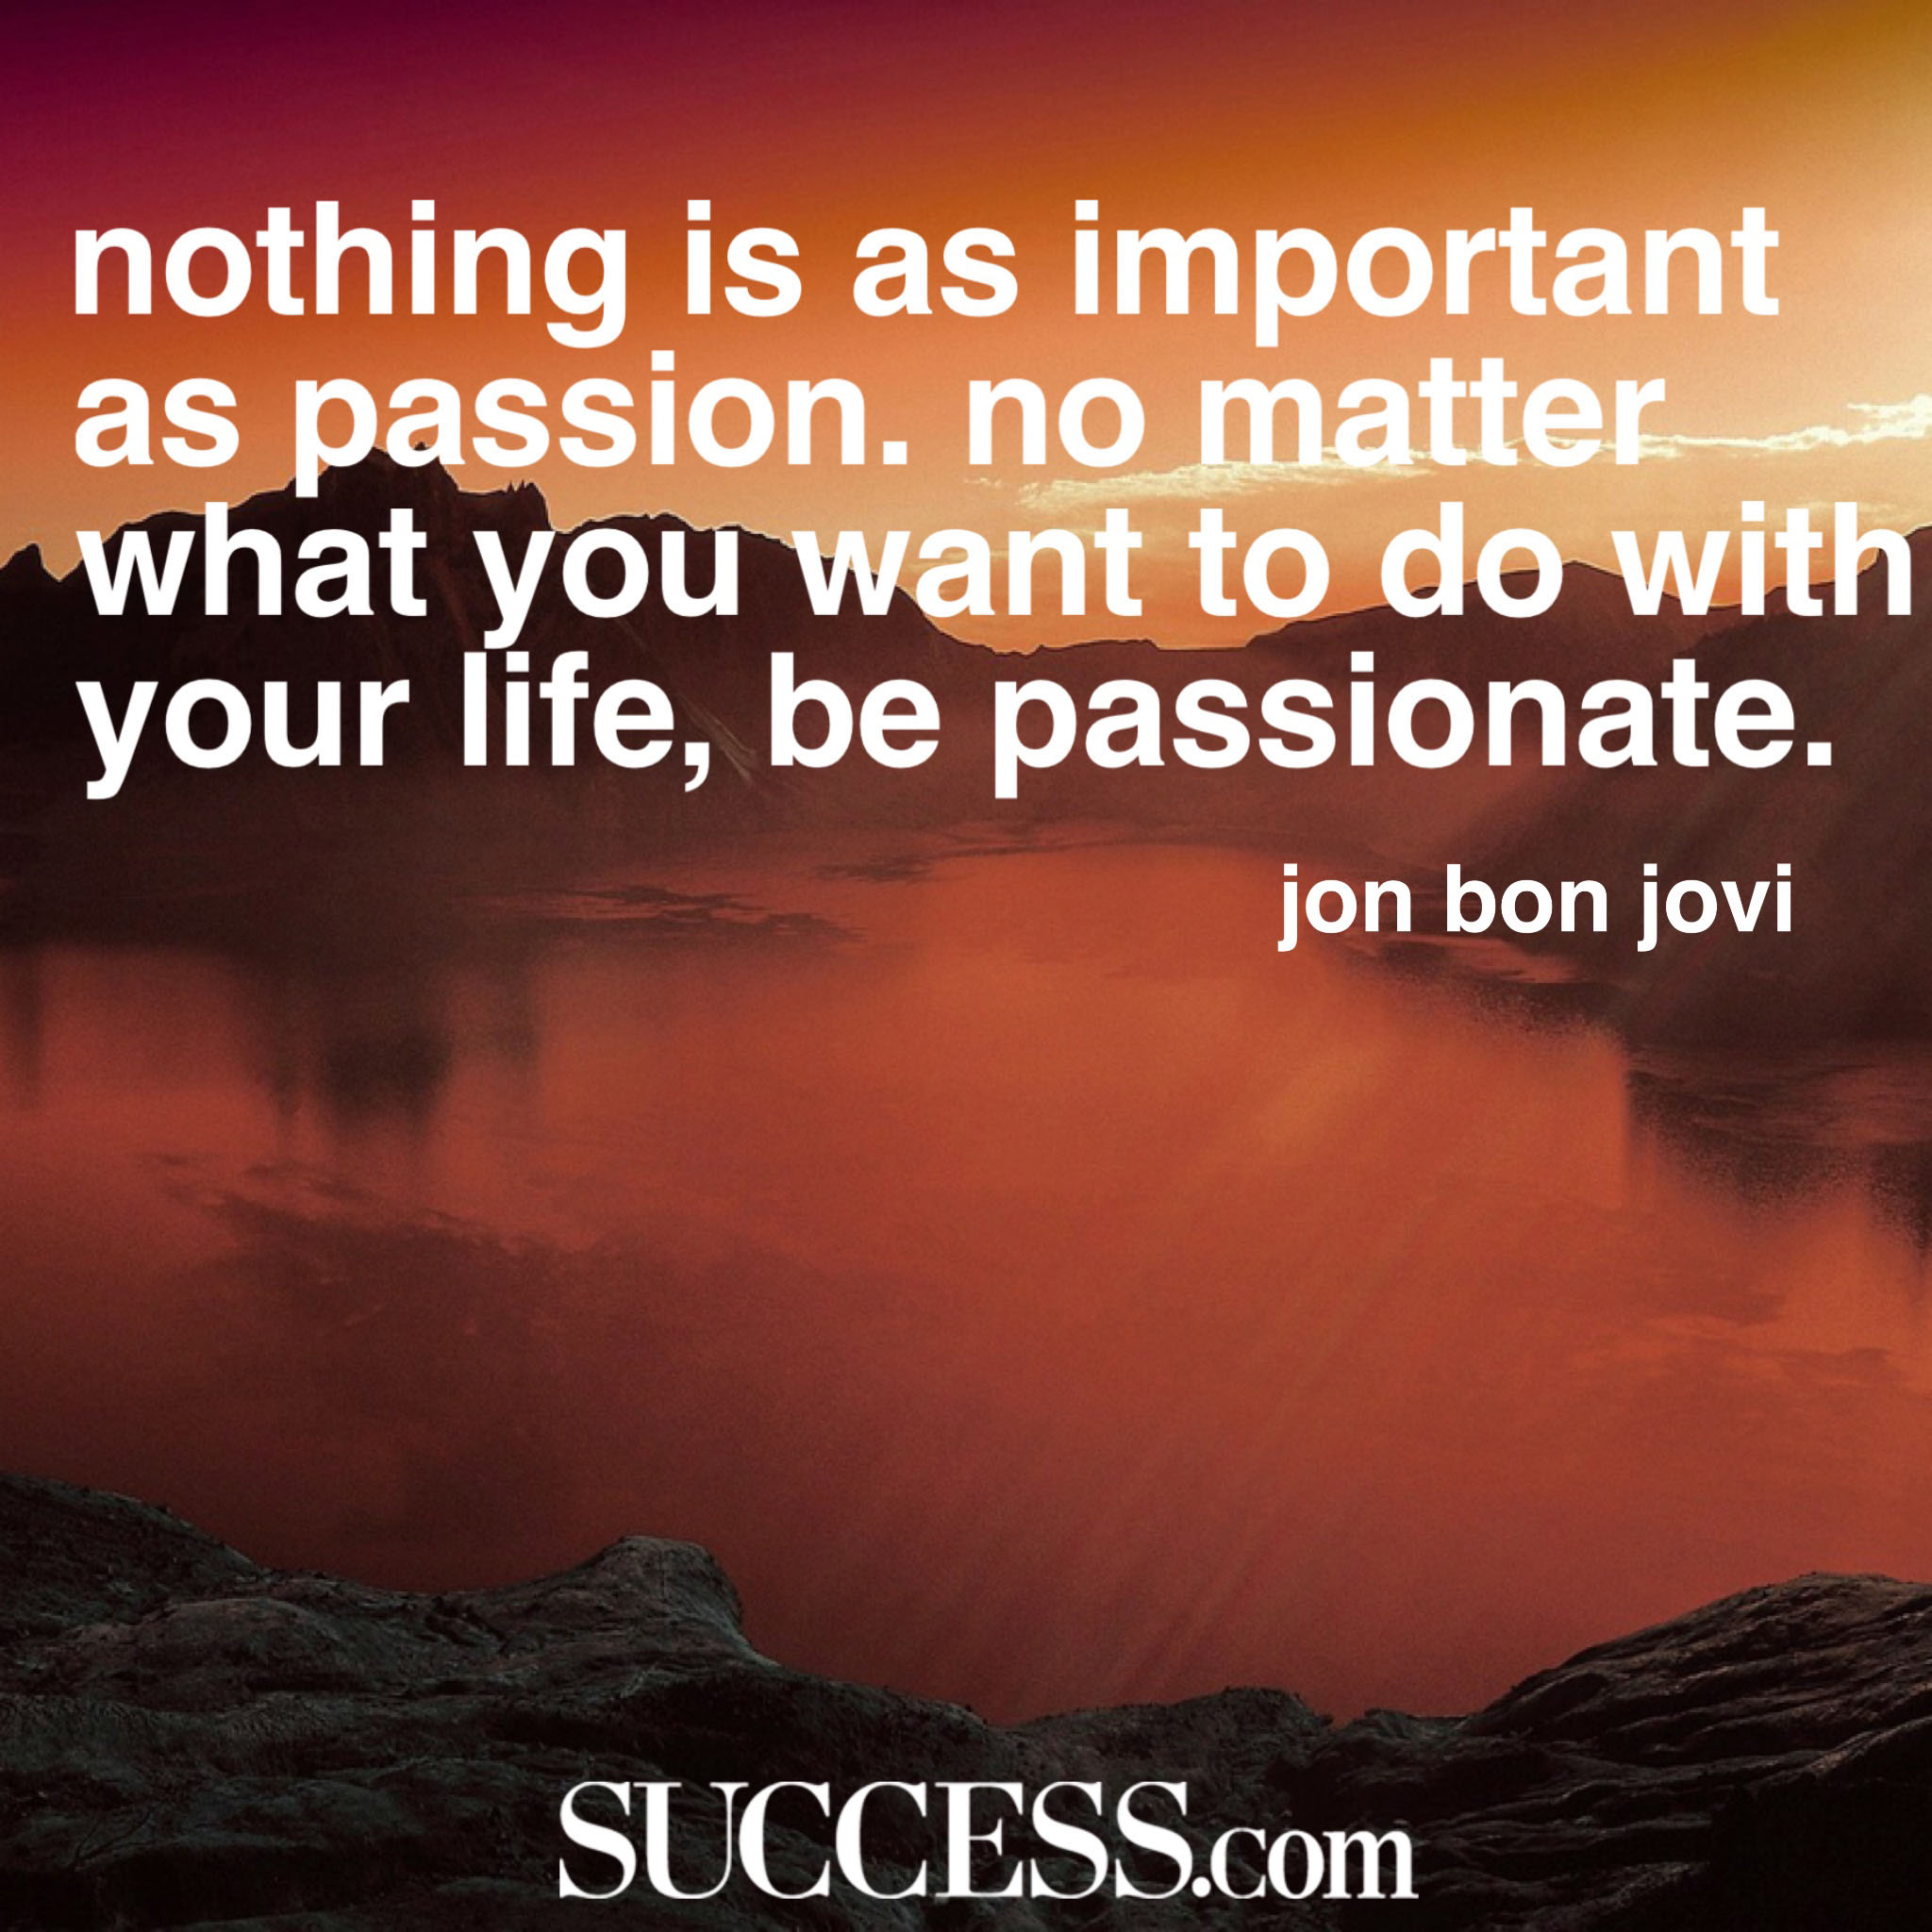 19 Quotes About Following Your Passion Success